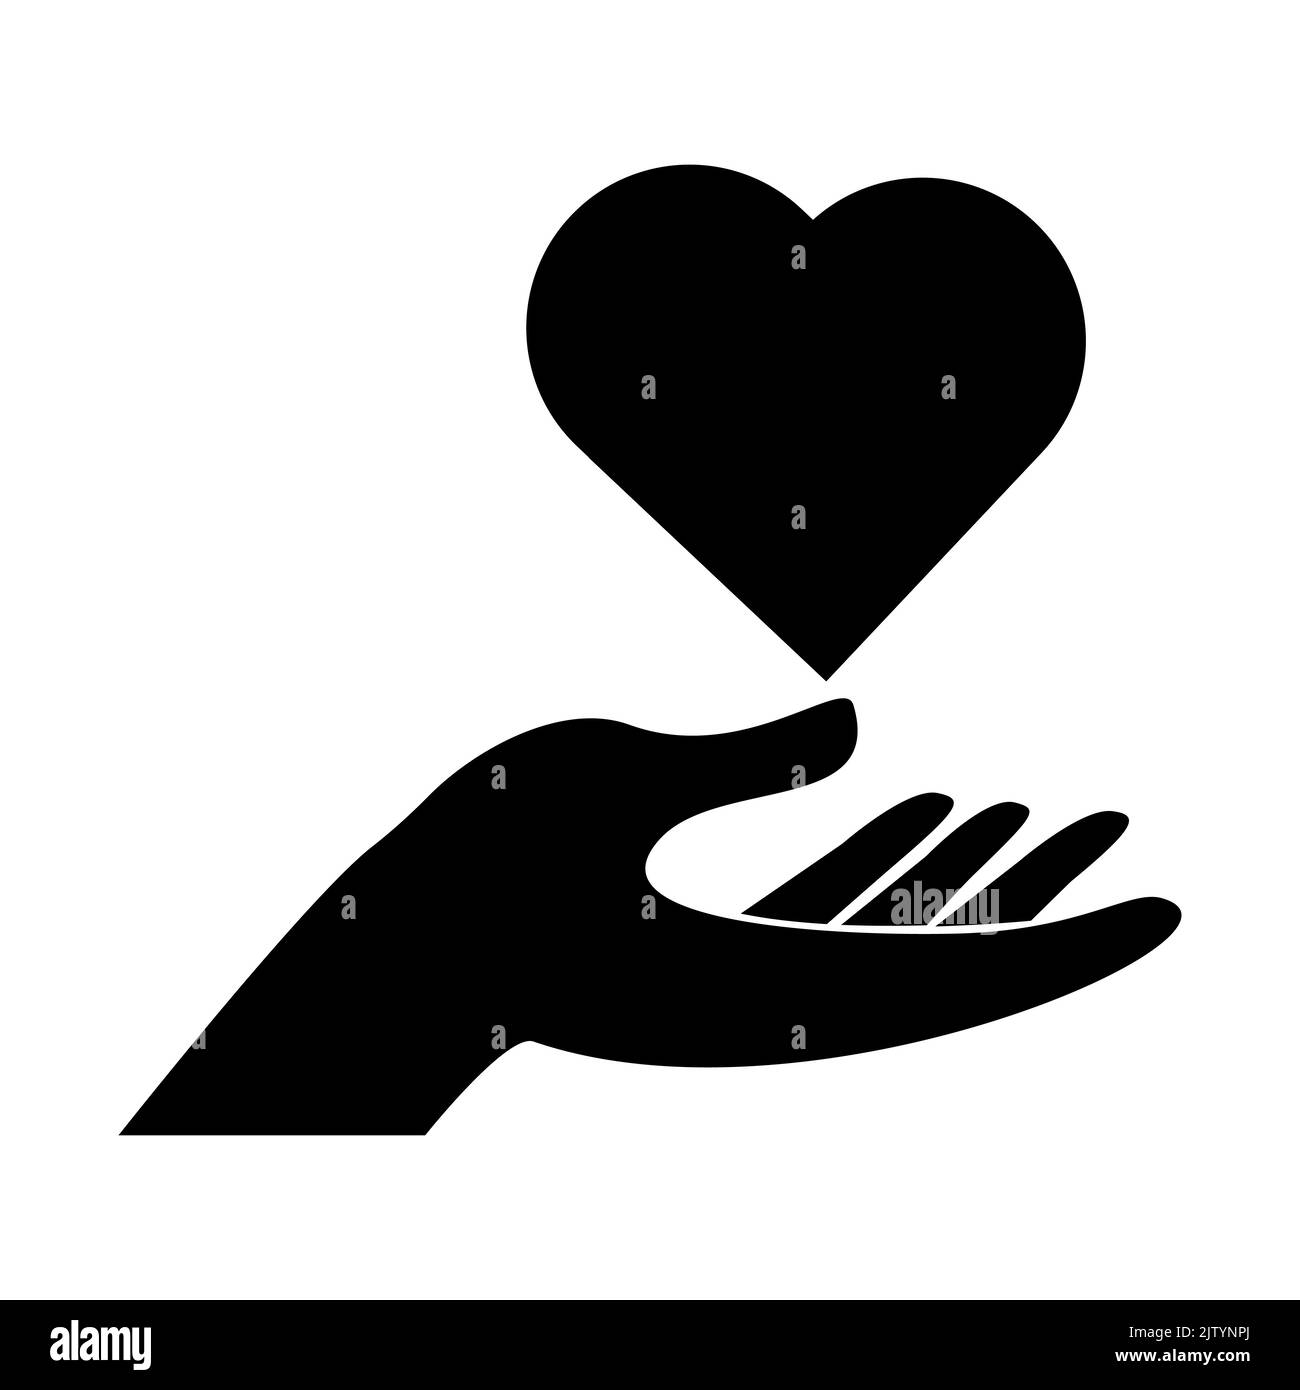 Human hand silhouette heart shape charity concept isolated on white background. Arm with fingers, helpful gesture. Vector illustration Stock Vector